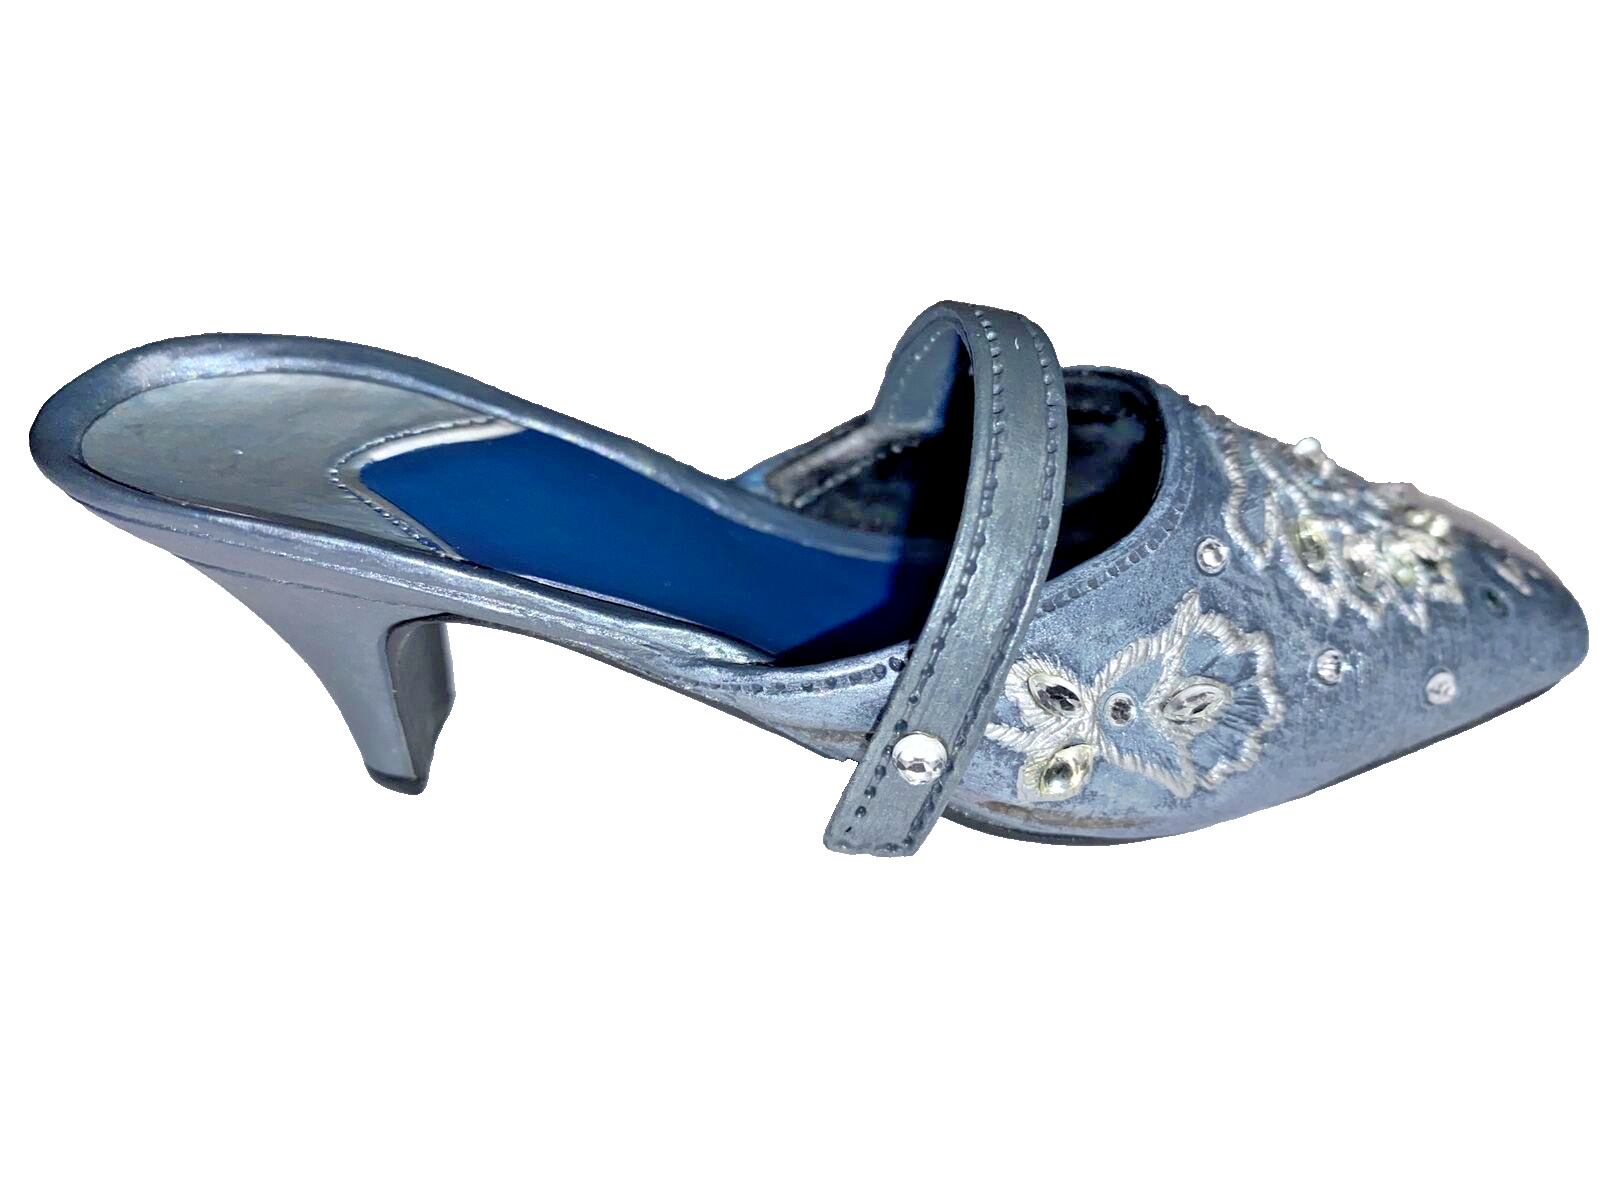 1999 Just the Right shoe Shimmering Night Blue Gray jeweled heeled 4”shoe Raines